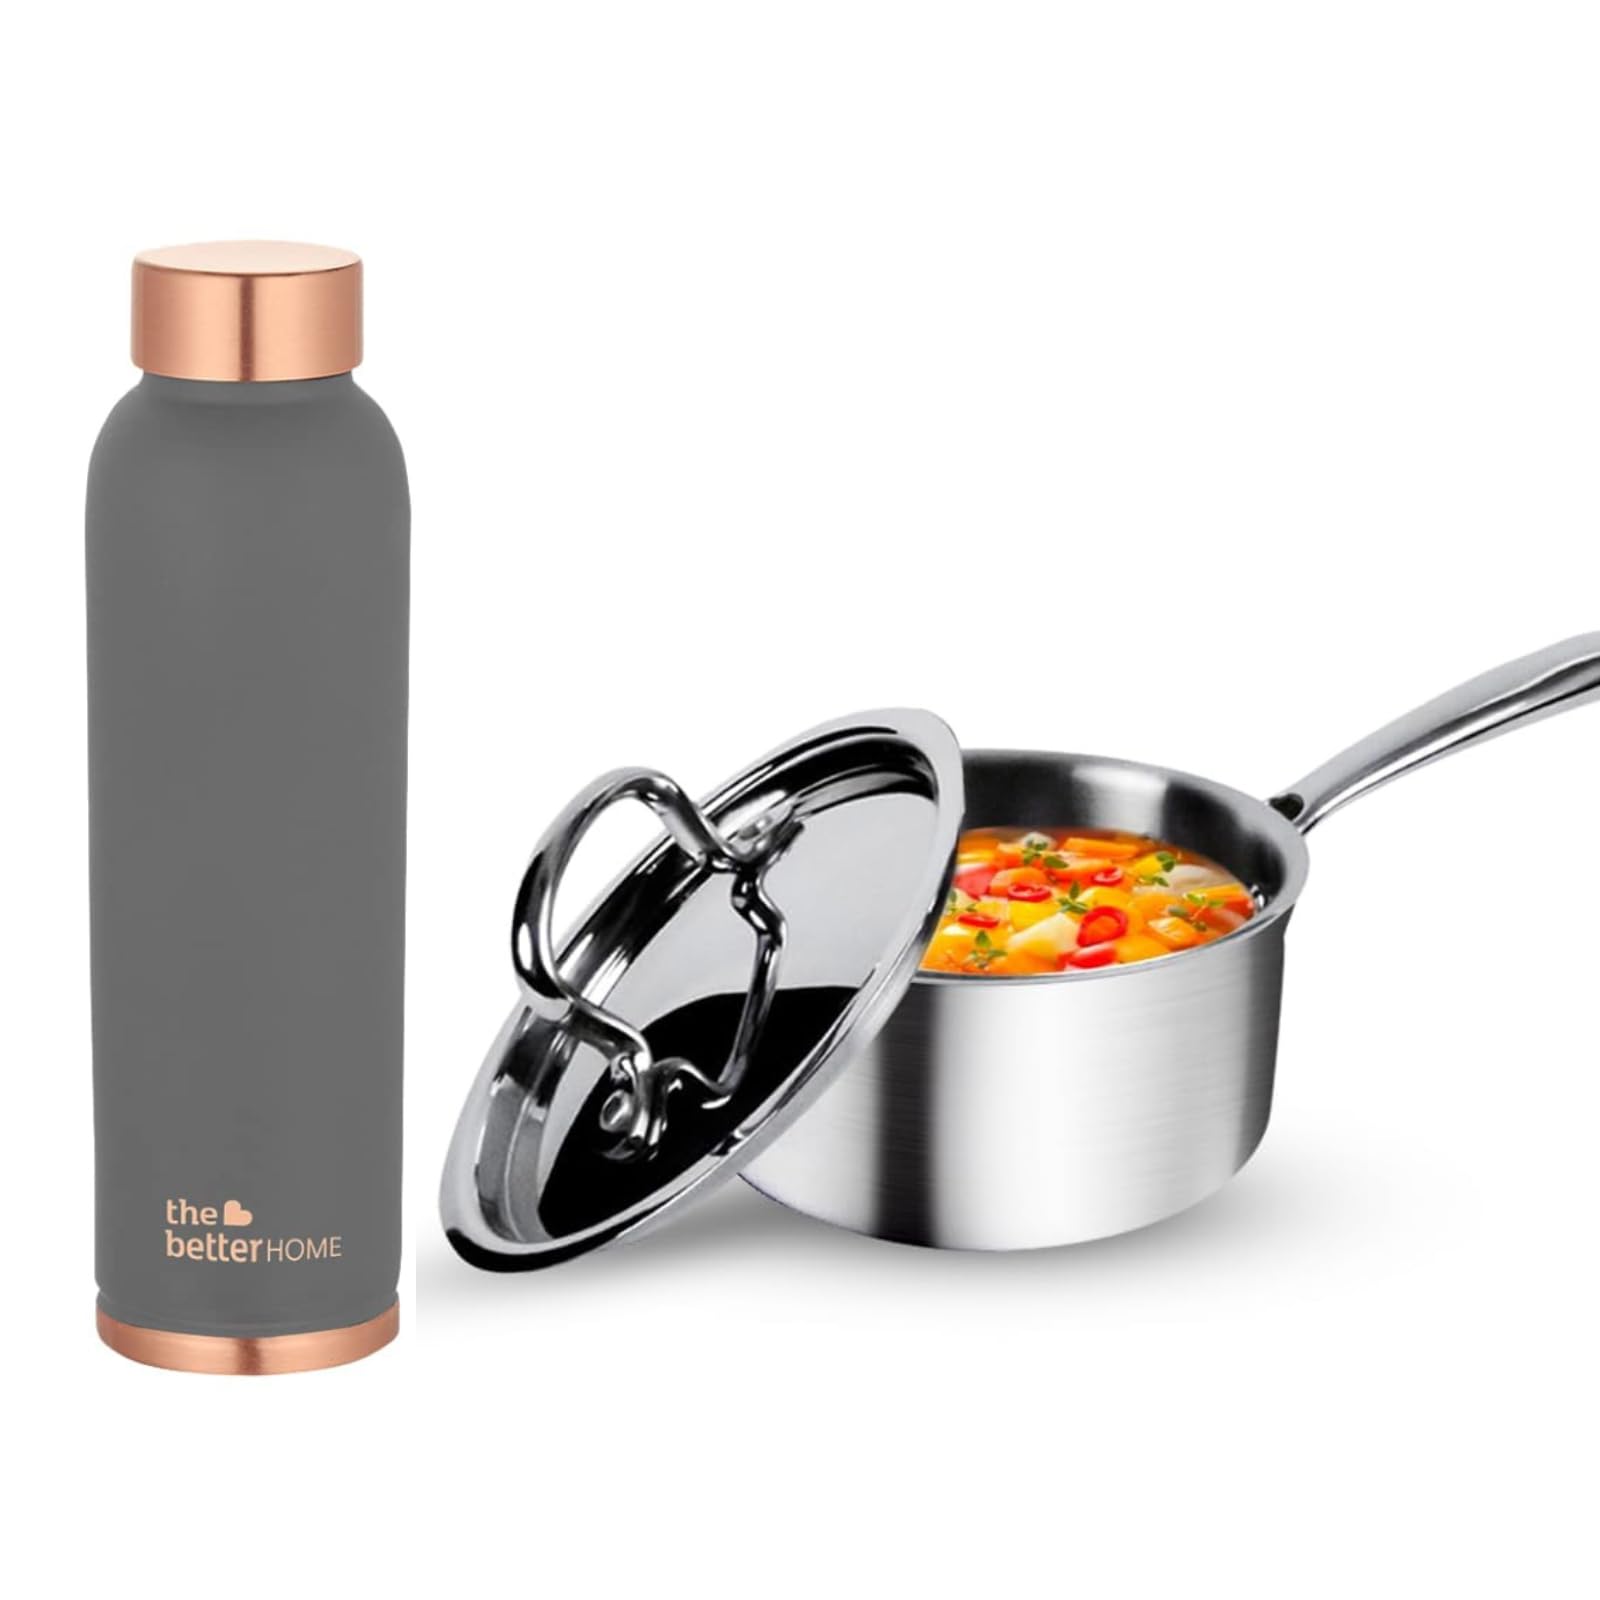 The Better Home 100% Pure Copper Water Bottle 1 Litre, Teal & Savya Home Triply Stainless Steel Saucepan with Lid, 18cm, 2.2 litres (Stove & Induction Cookware) (Grey)